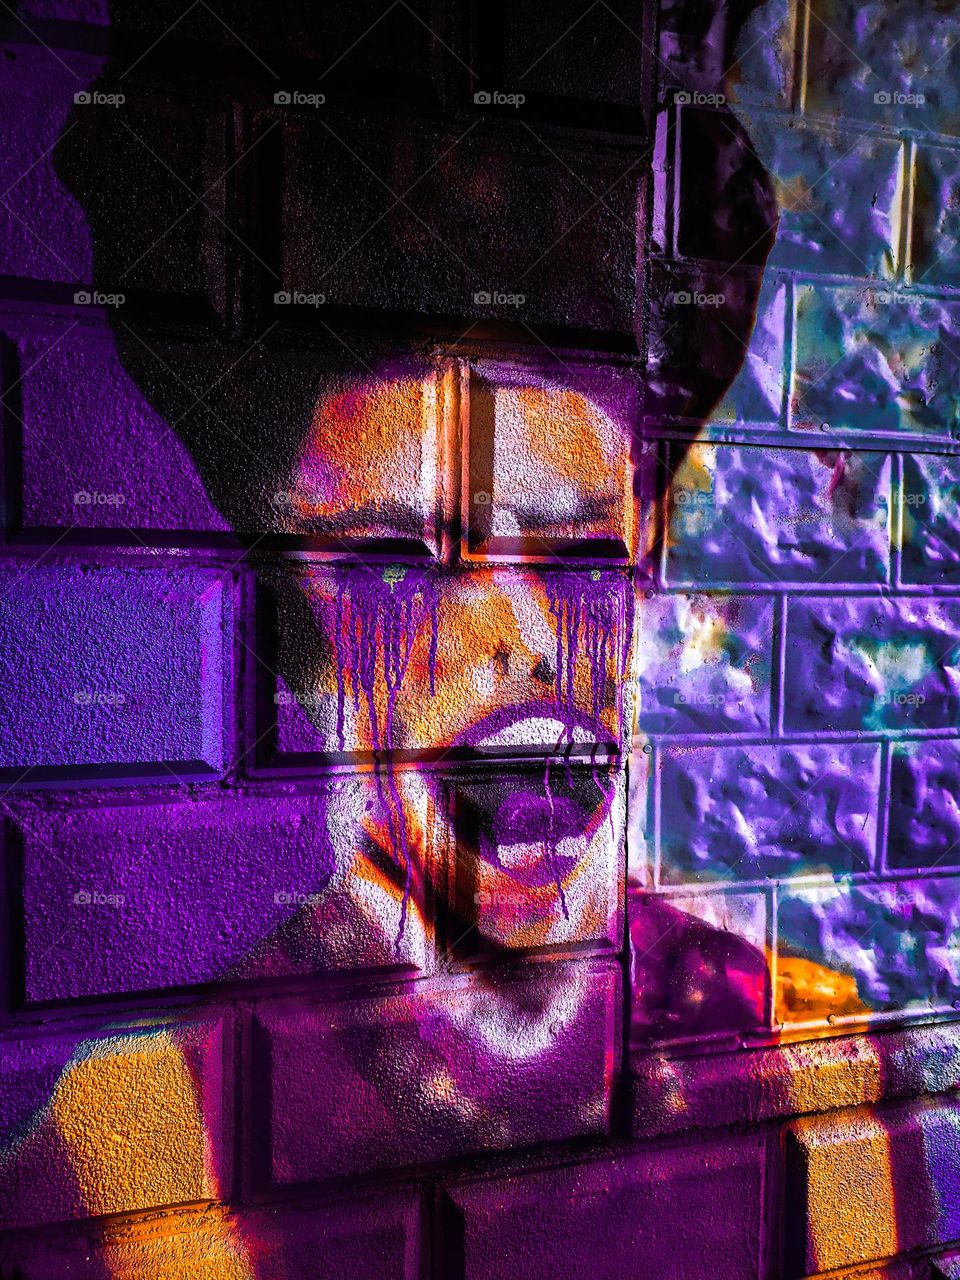 Graffiti wall mural dark abstract portrait creepy street artist art artwork purple dripping spray paint Color colorful contrast amateur photography vibrant phone photo no people creativity creative different